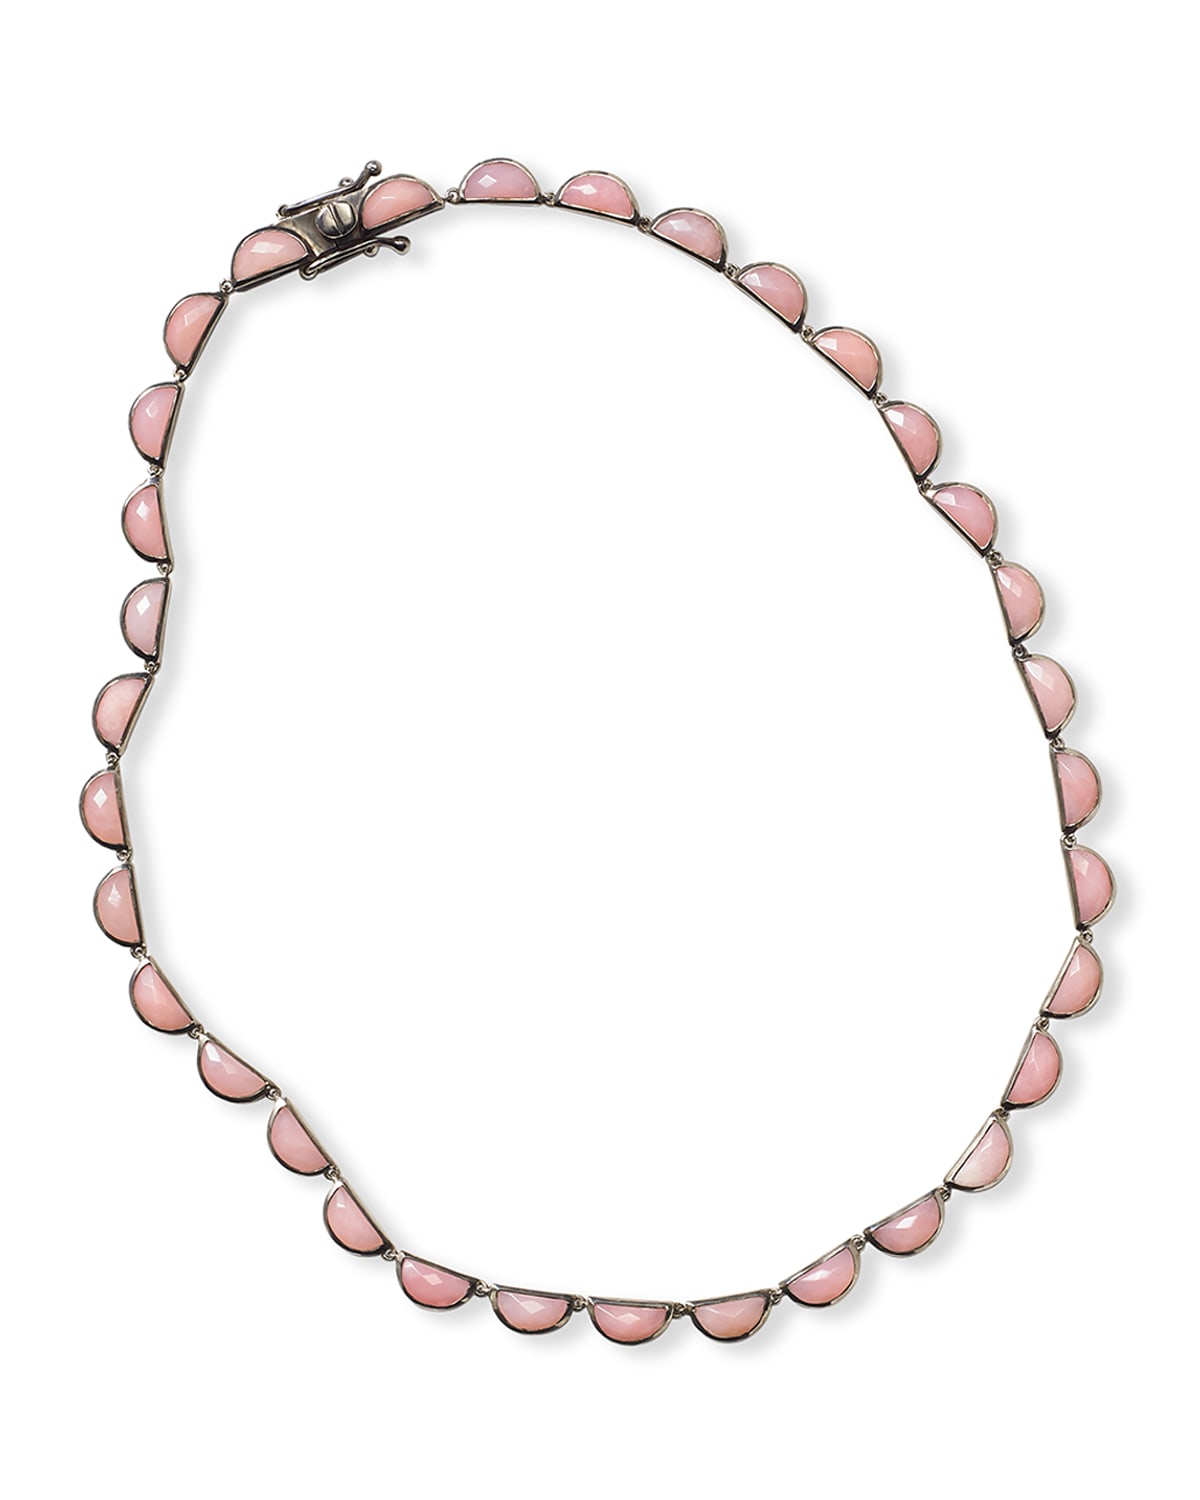 Large Scallop Riviere Necklace in Pink Opal